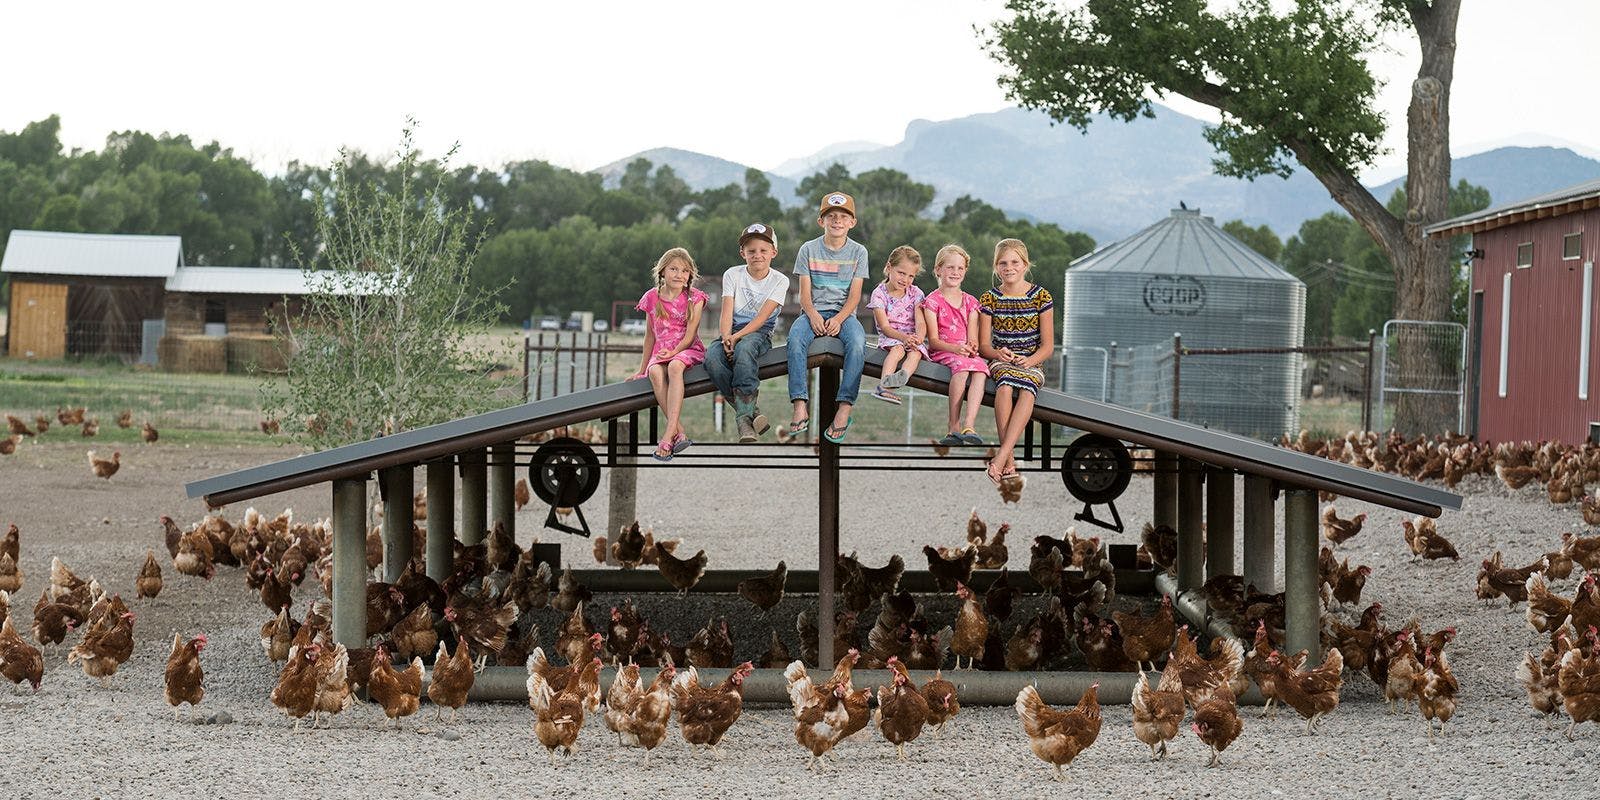 Five children sit on top of a chicken shelter while brown hens roam around them.